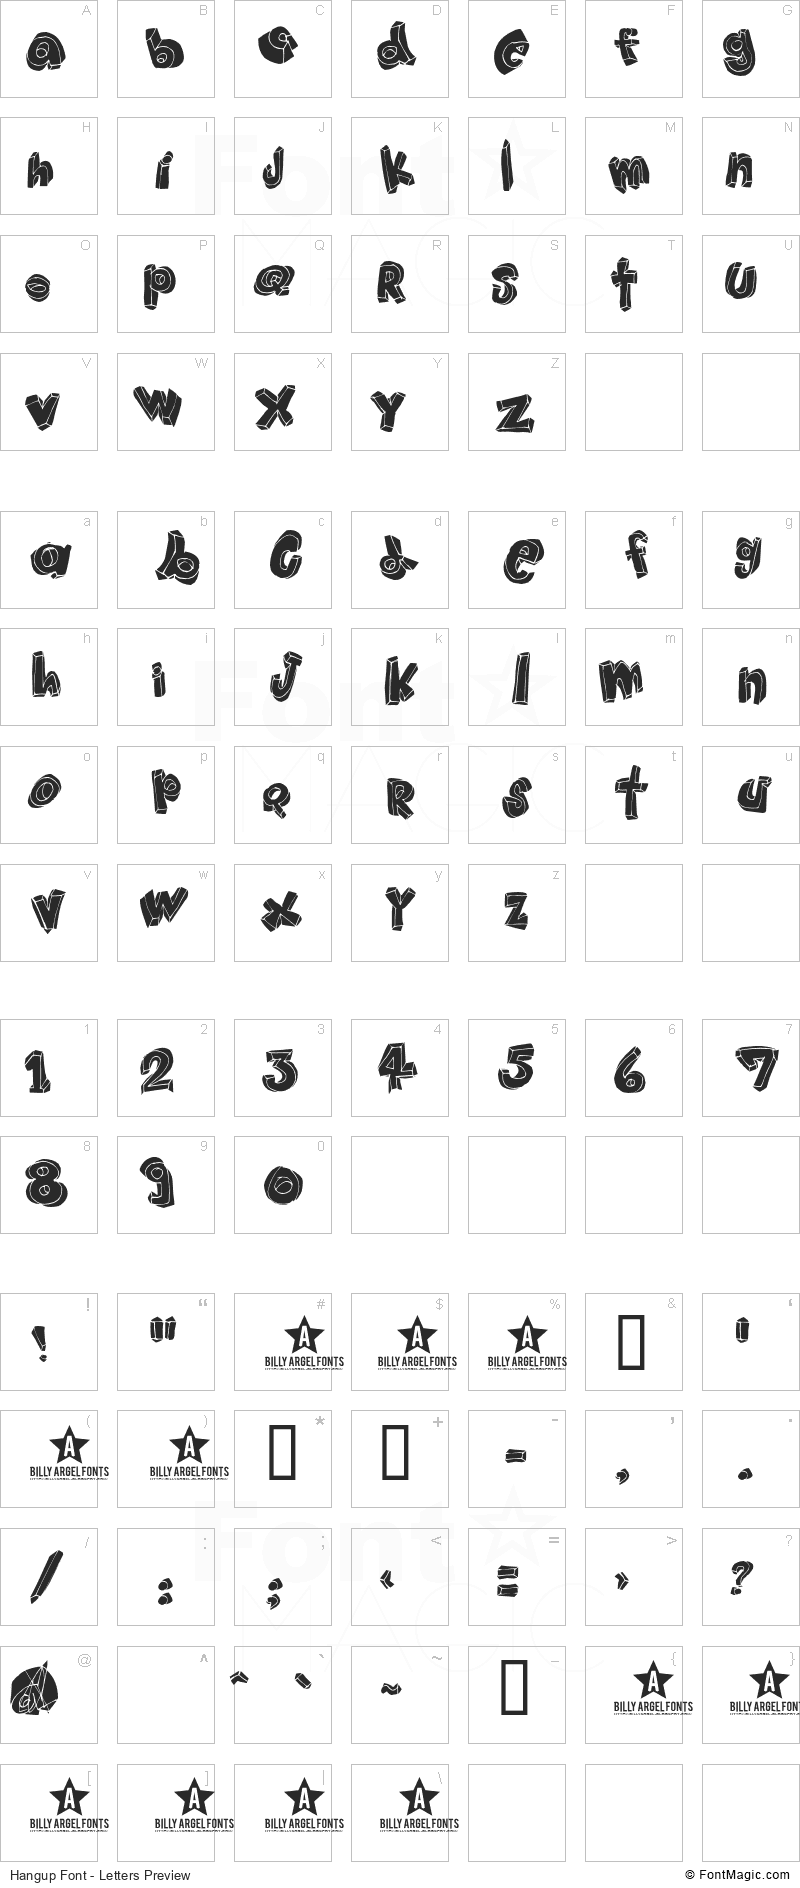 Hangup Font - All Latters Preview Chart